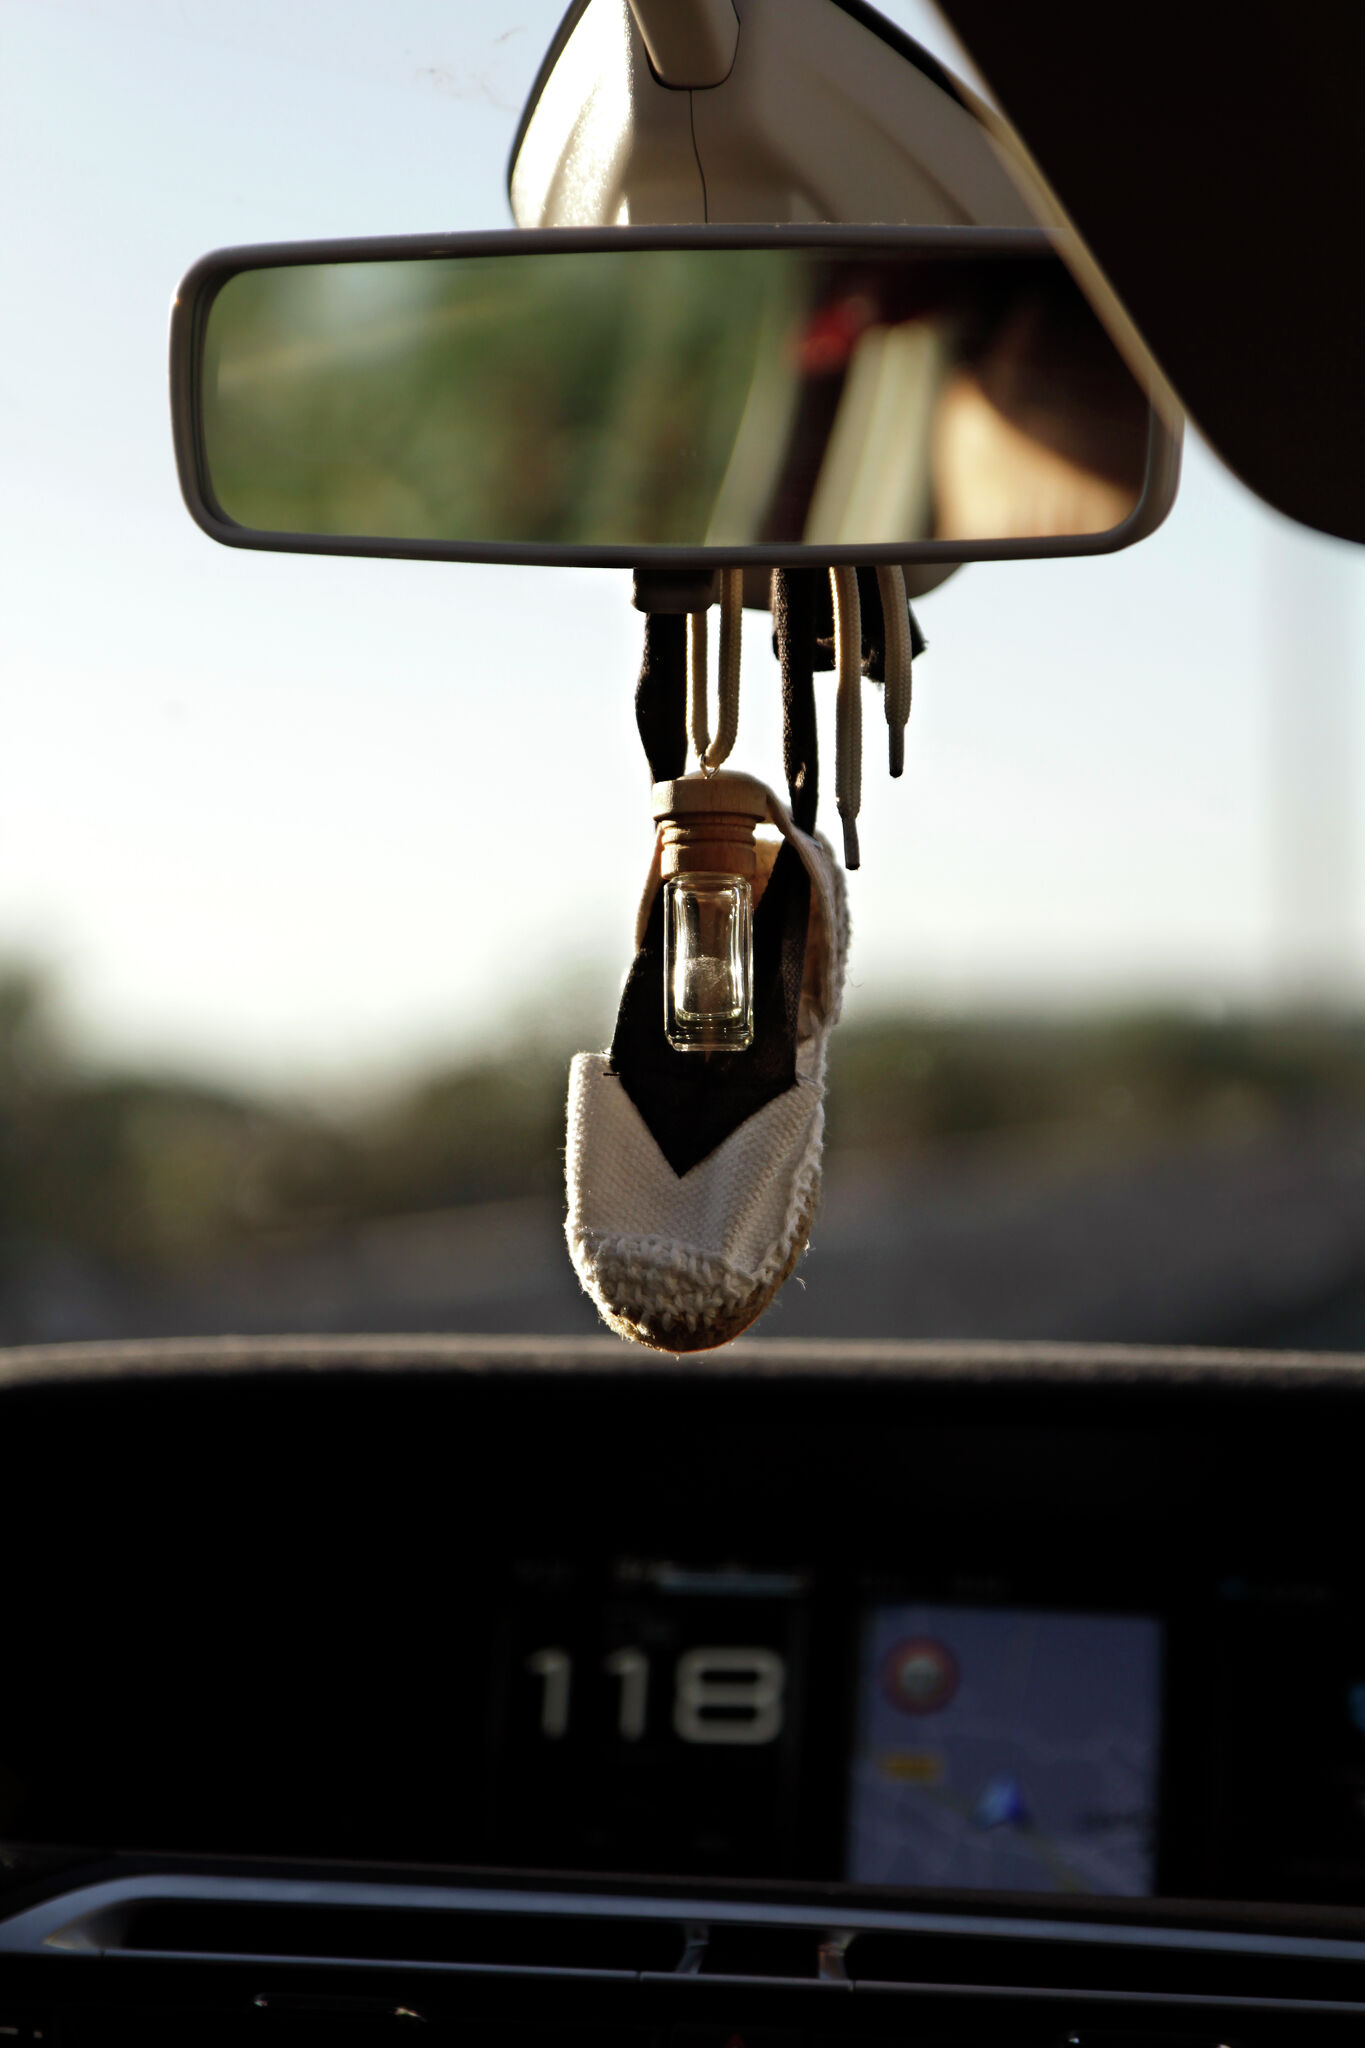 Is It Illegal to Hang Items from the Rearview Mirror in Michigan?